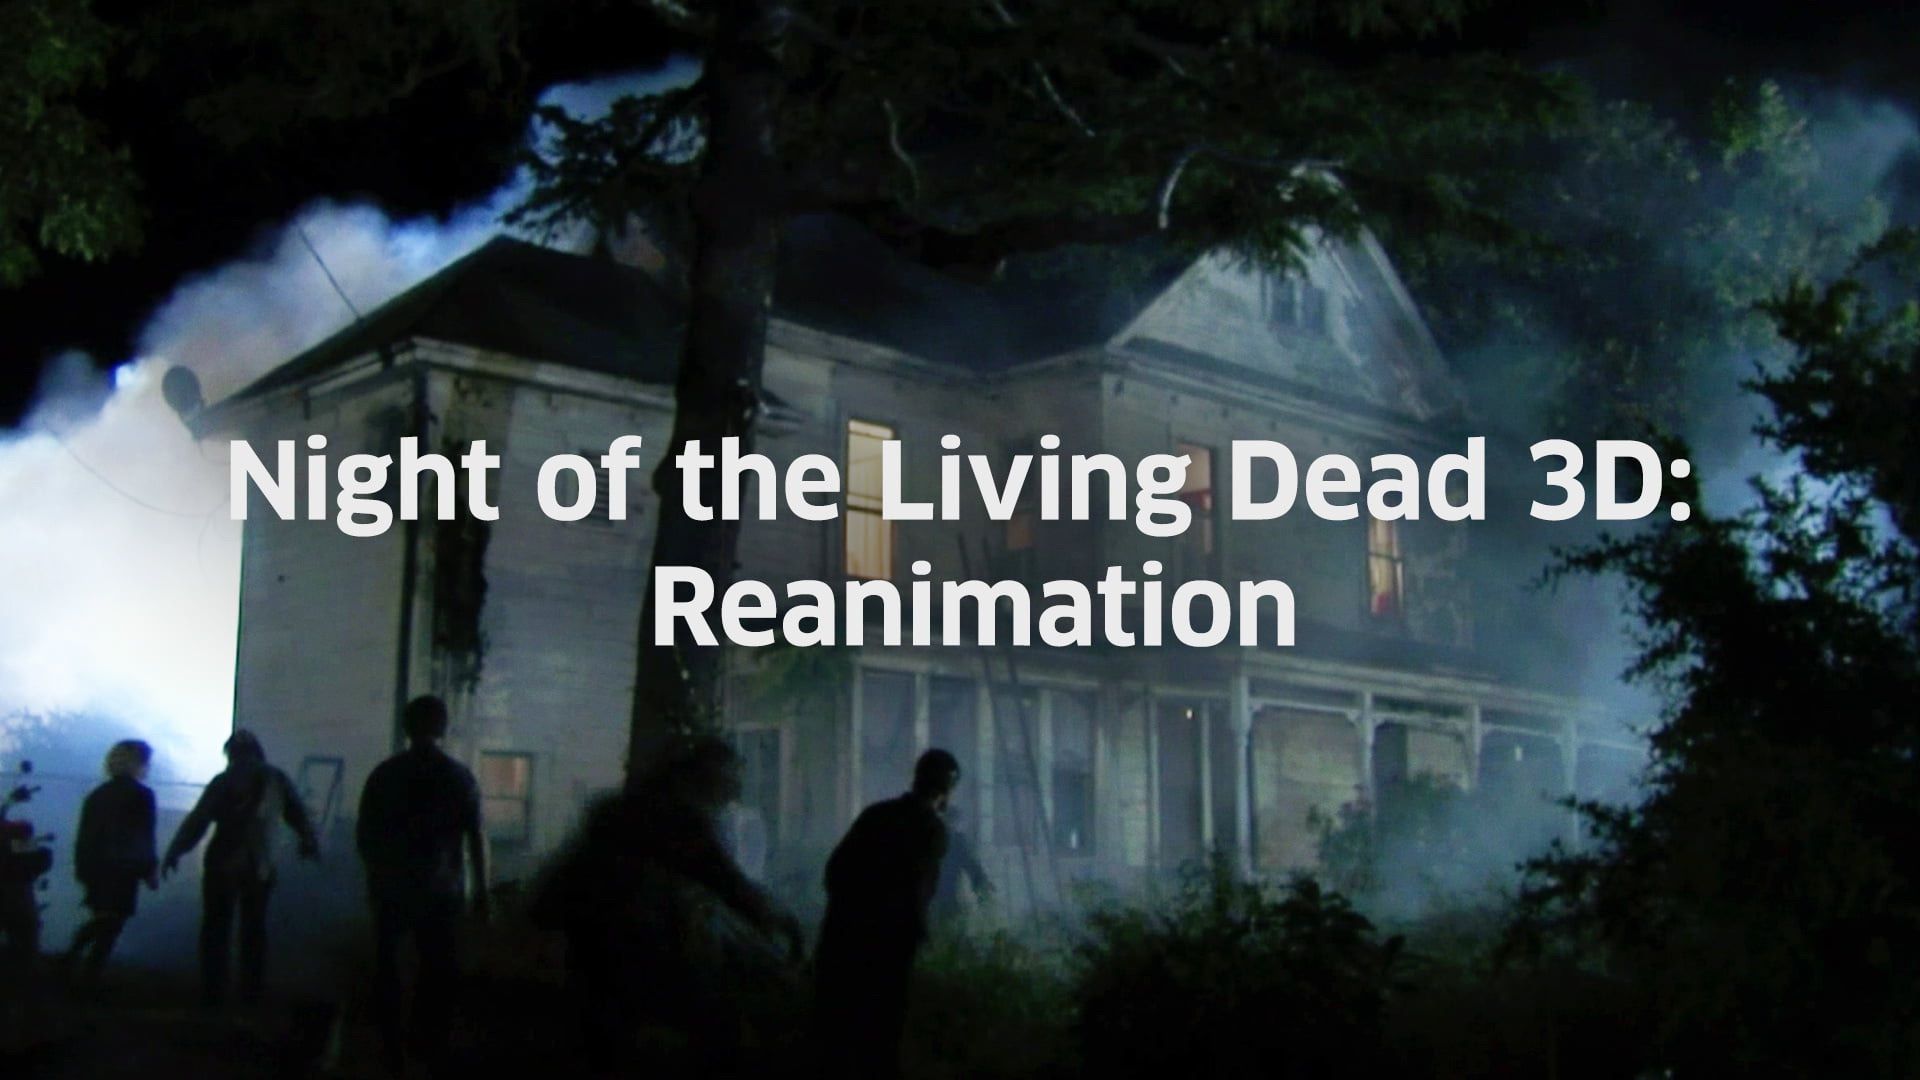 Night of the Living Dead 3D: Re-Animation Backdrop